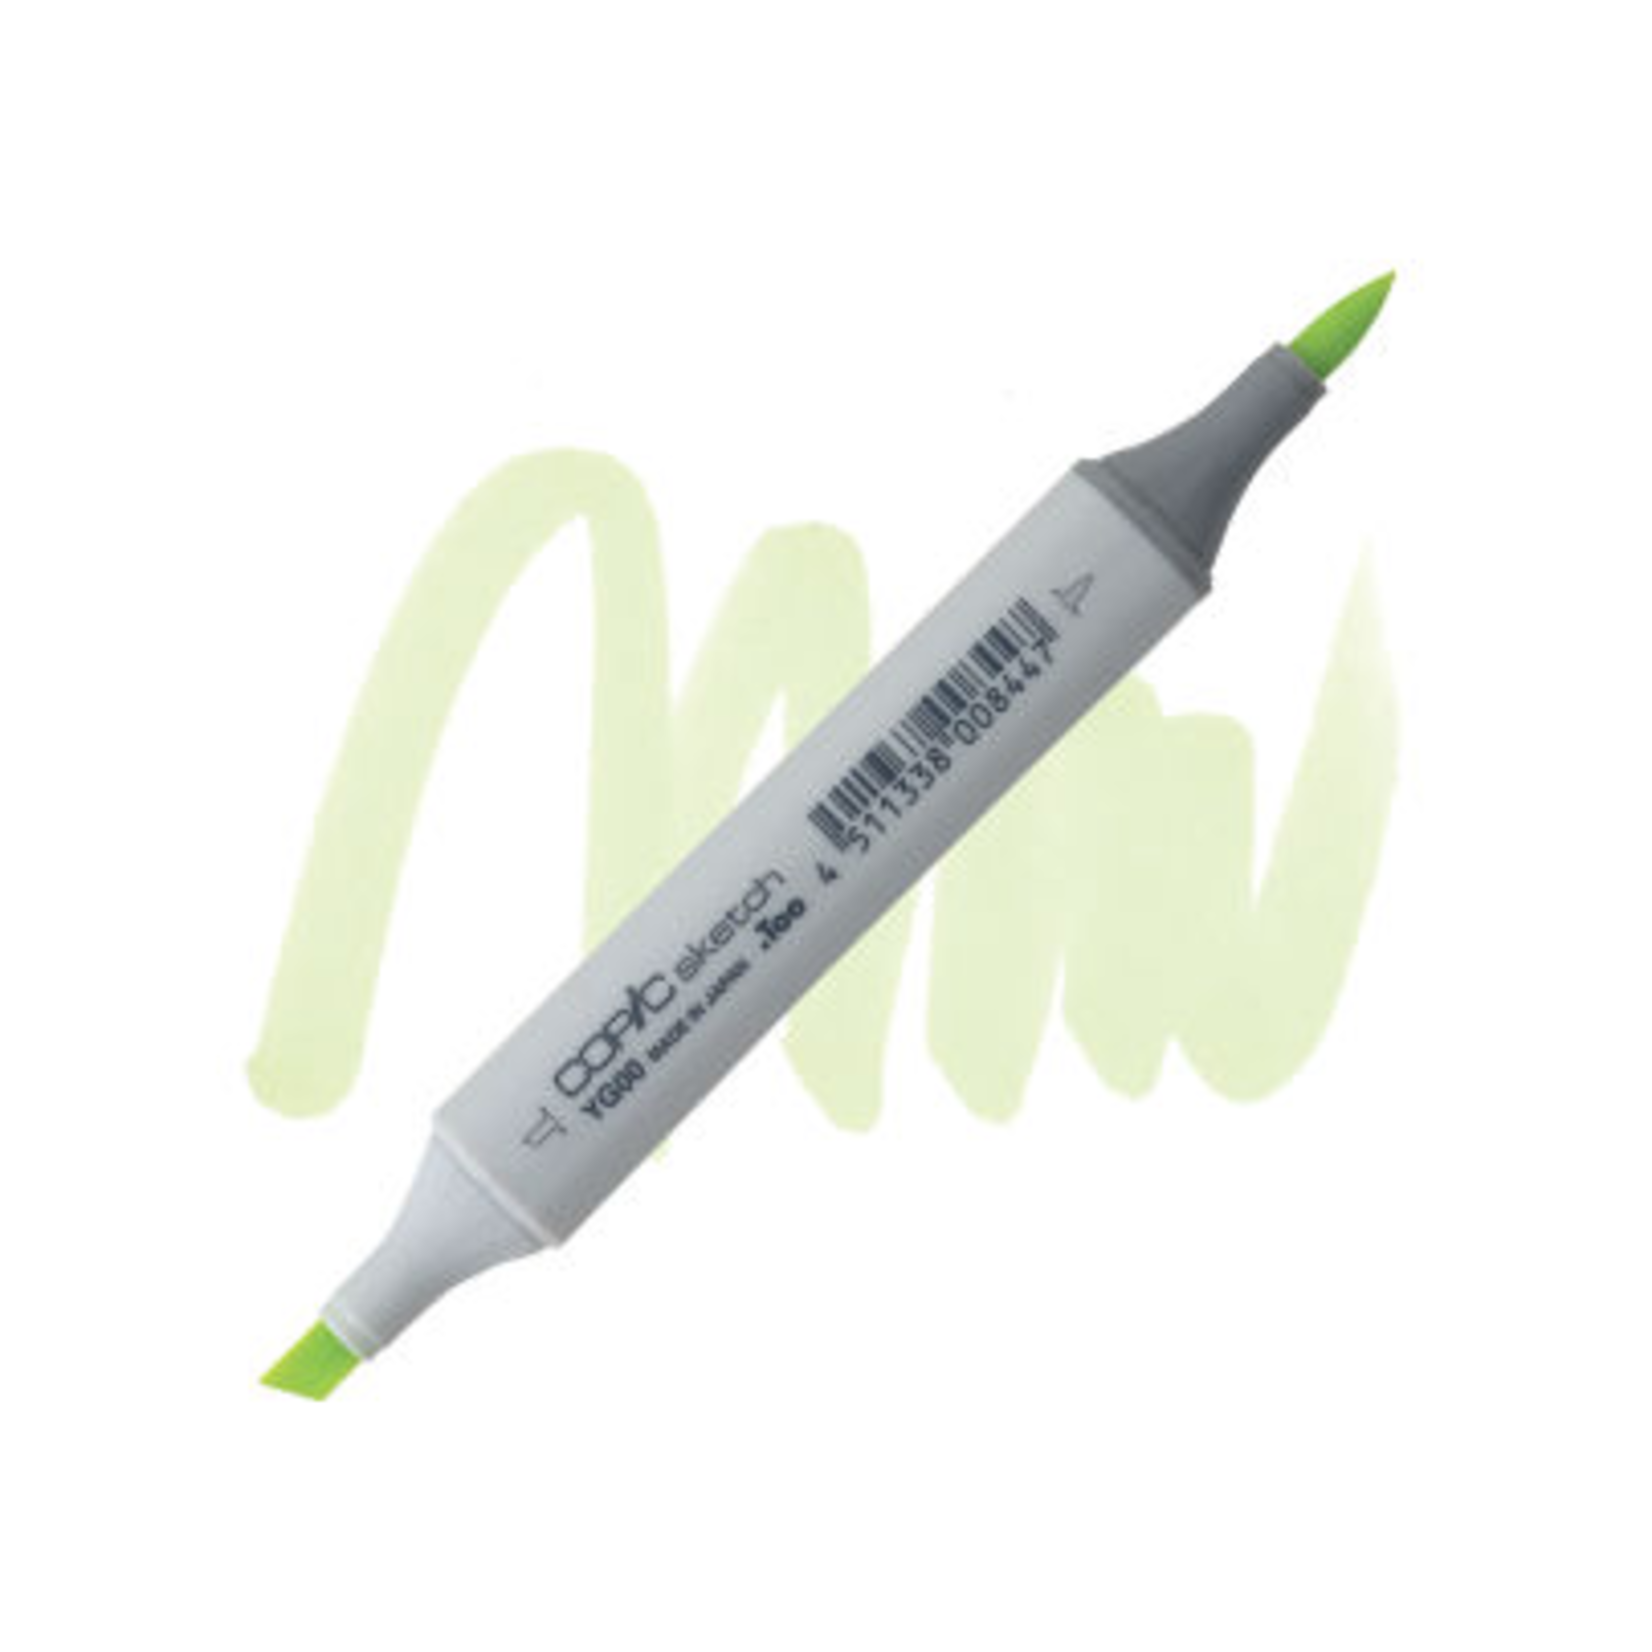 Copic Copic Sketch YG00 - Mimosa Yellow